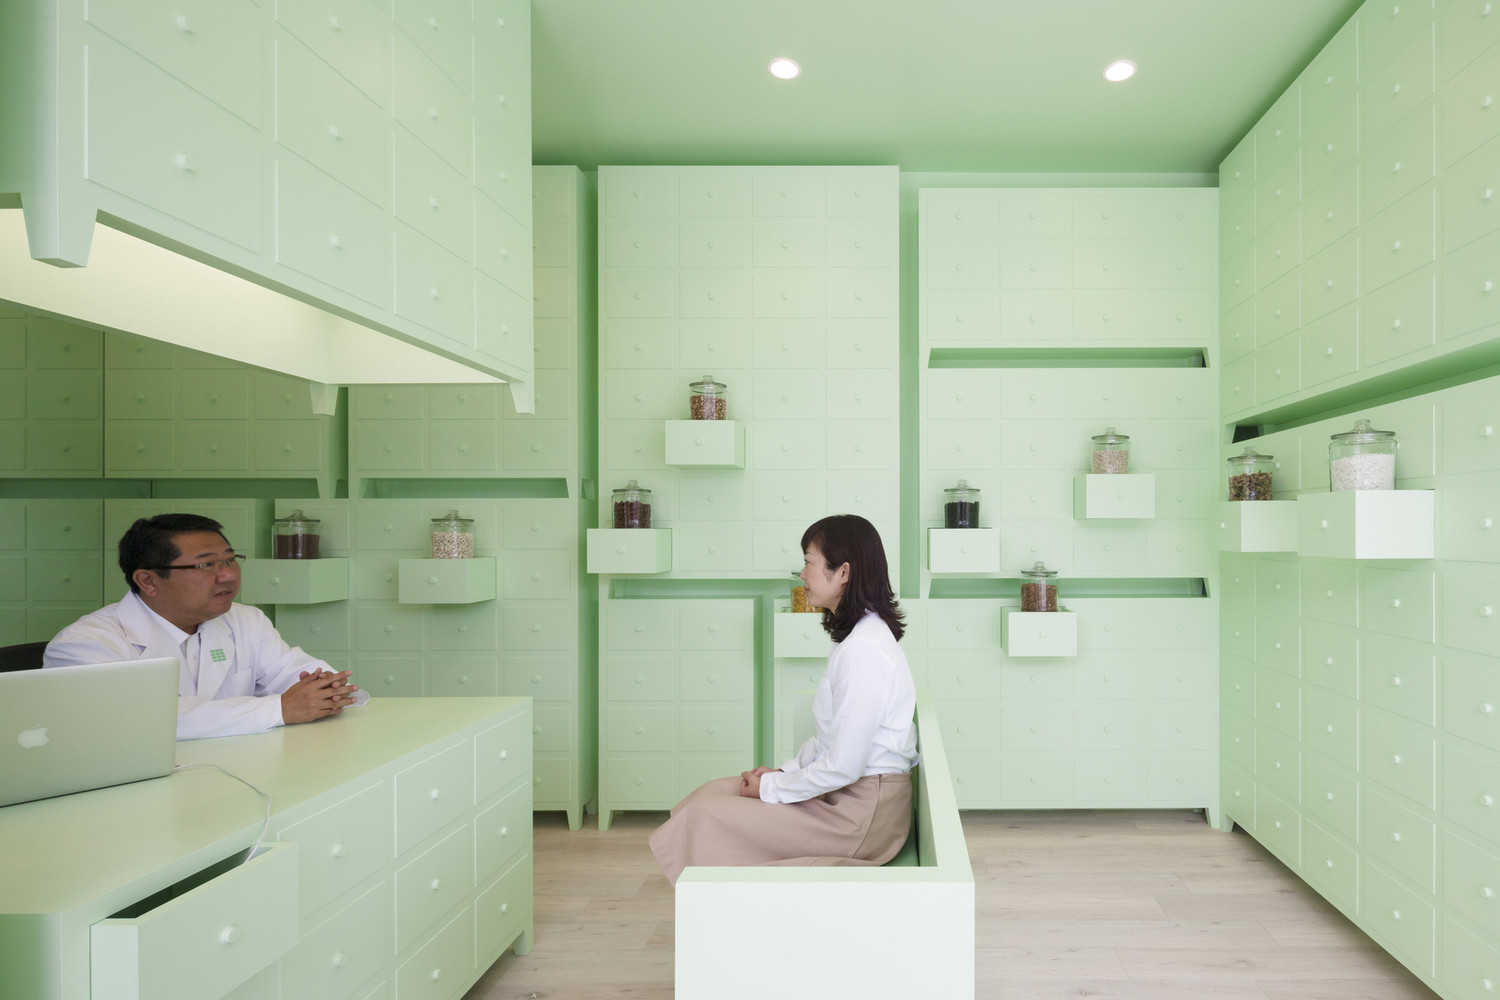 10 Different Projects That Feature the Color Green! - SUMIYOSHIDO kampo lounge / id inc.